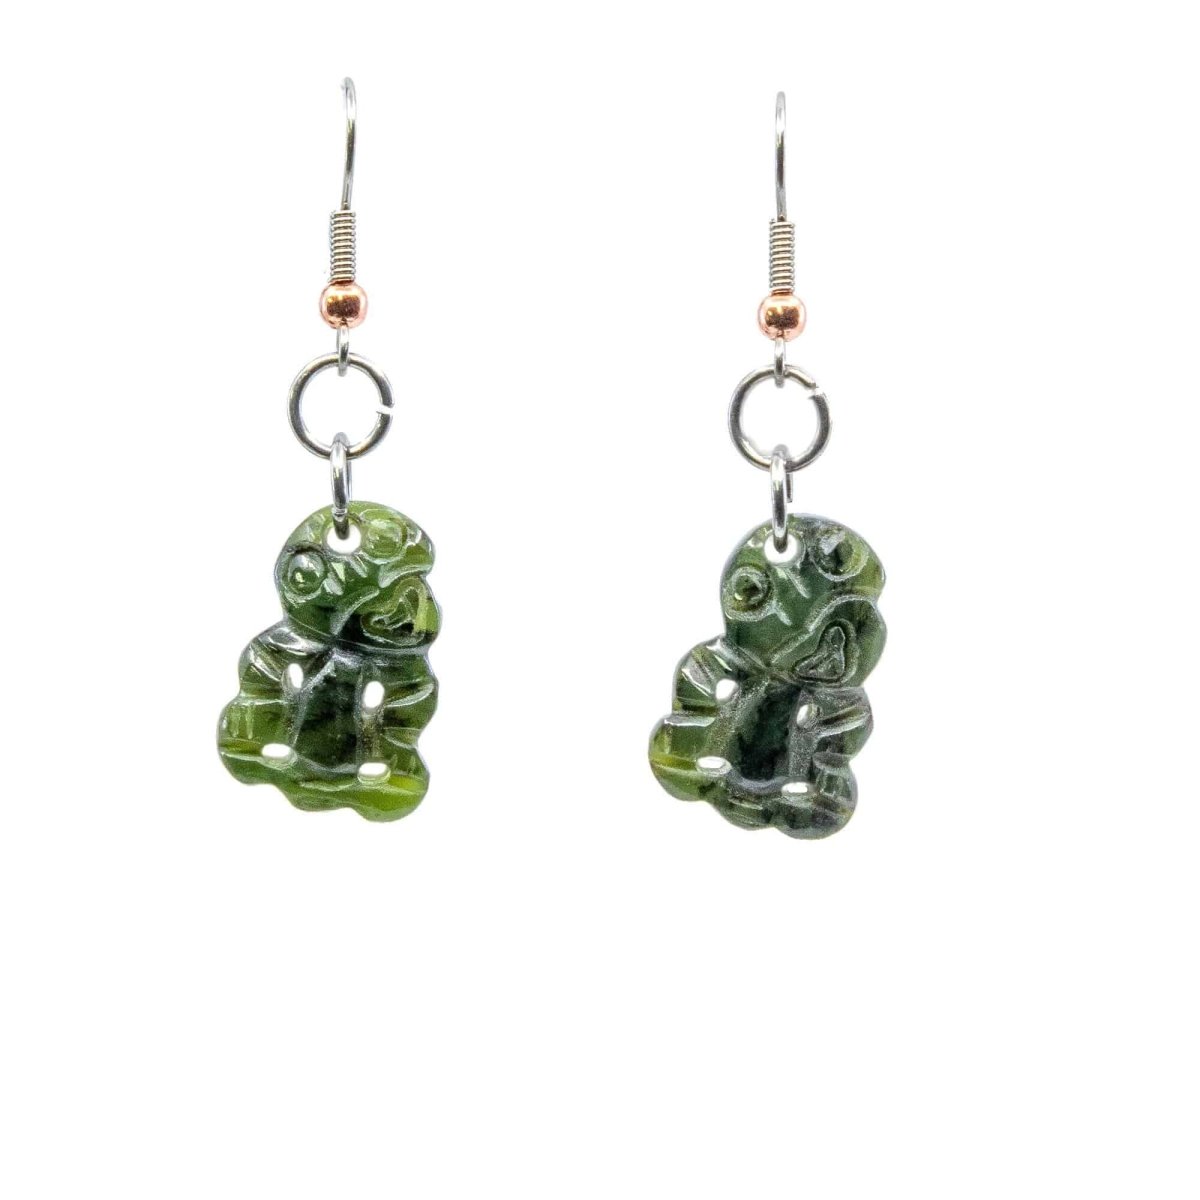 Nephrite Jade Tiki Earrings with Stainless Steel Hooks - Earthbound Pacific